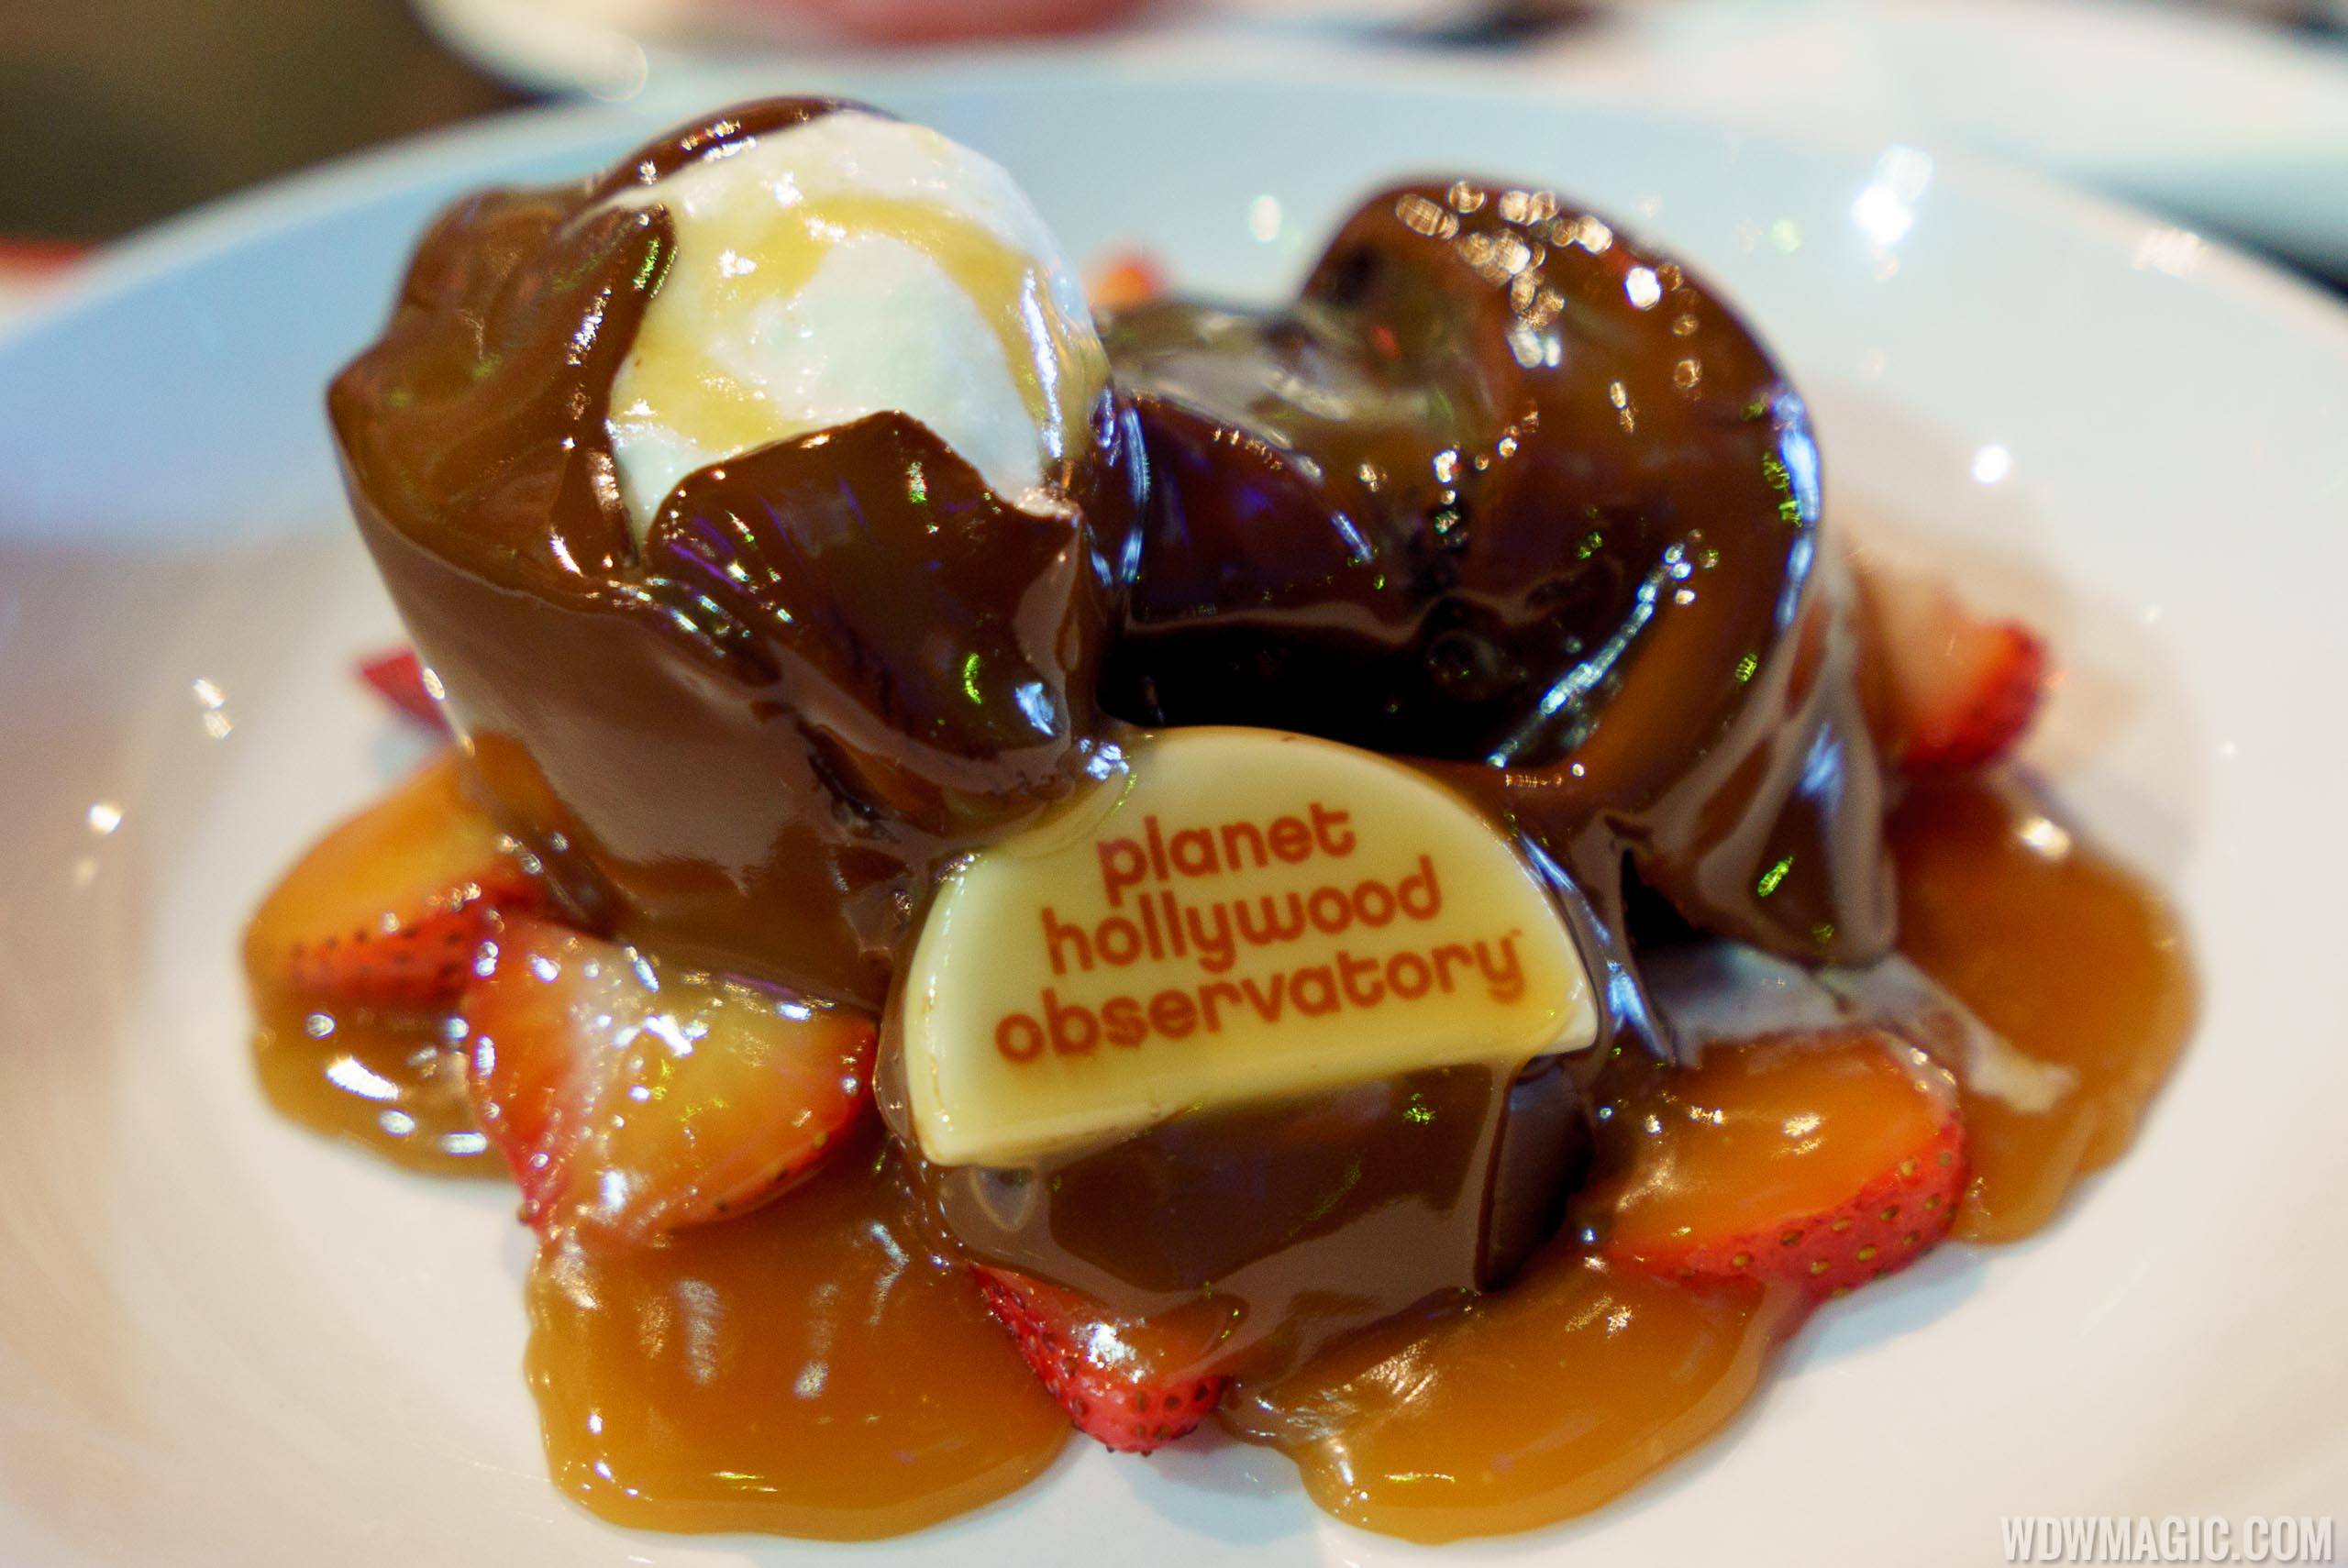 Planet Meltdown - $14.99 Chocolate sphere melted tableside by hot chocolate sauce to reveal double chocolate fudge cake, fresh strawberries & whipped cream 